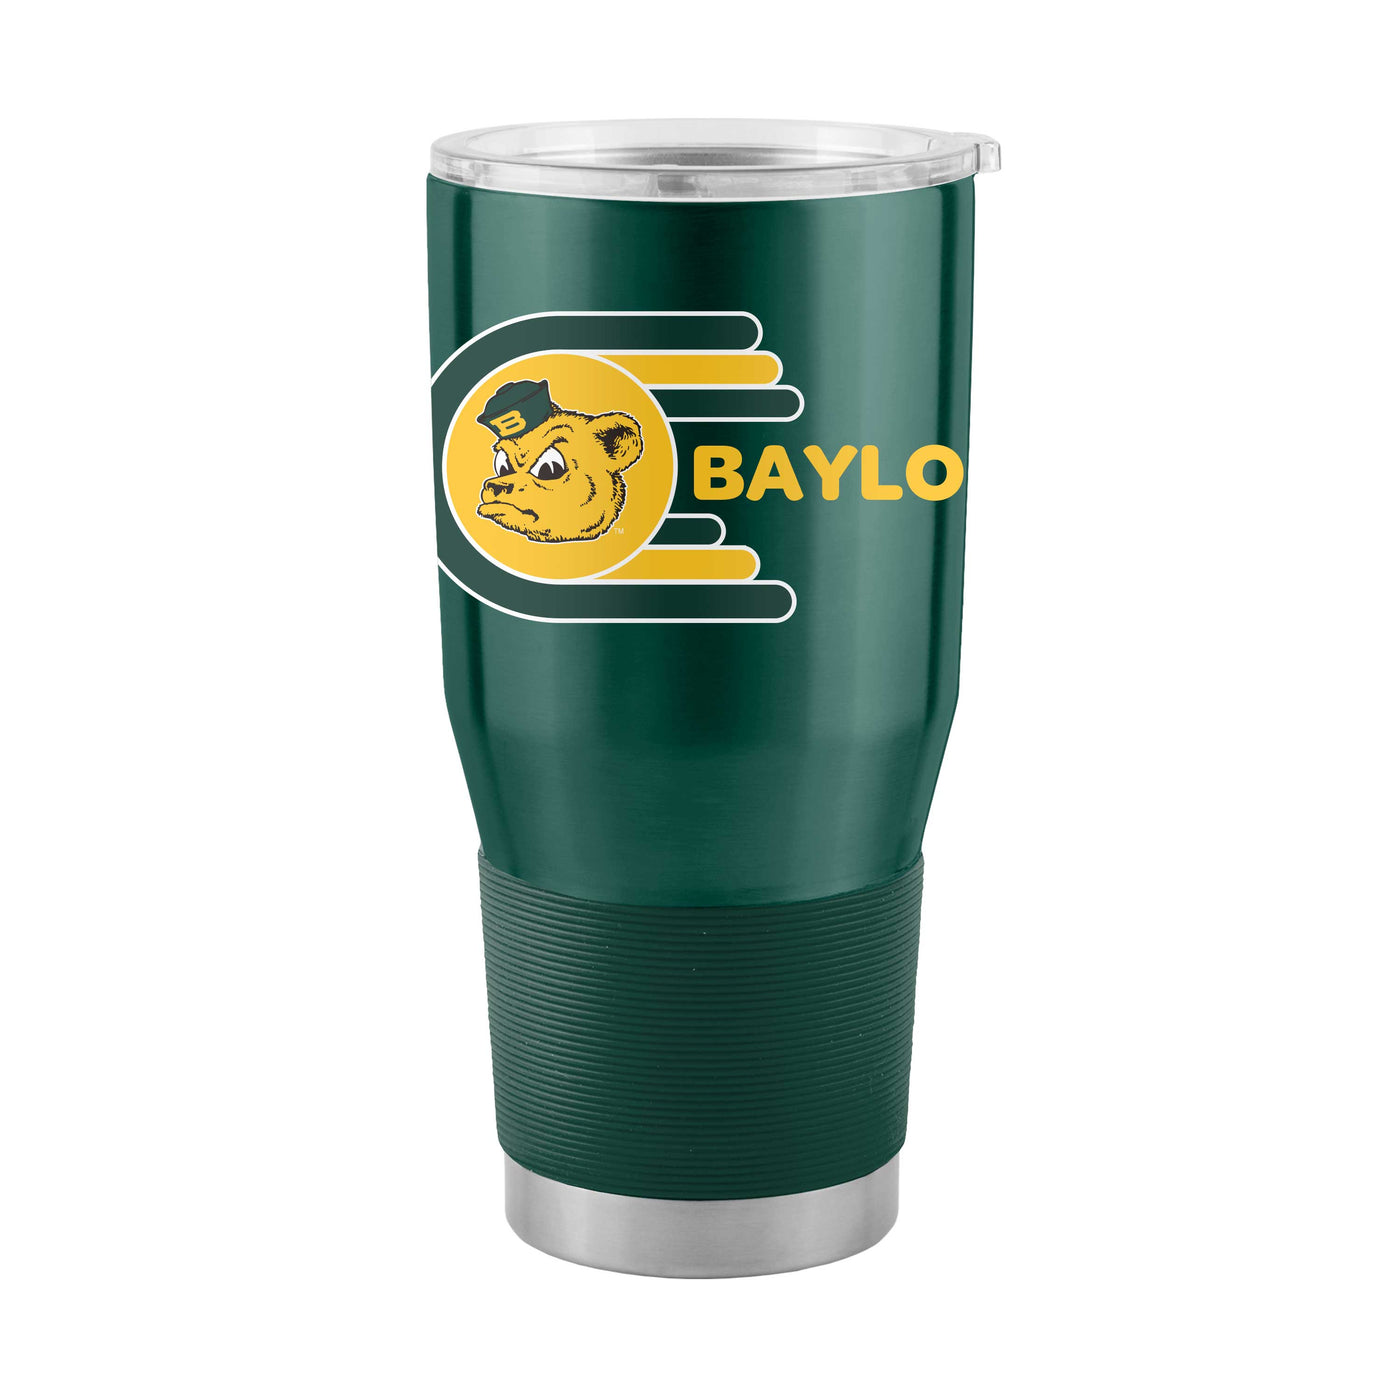 Baylor 30oz Whirl Stainless Steel Tumbler